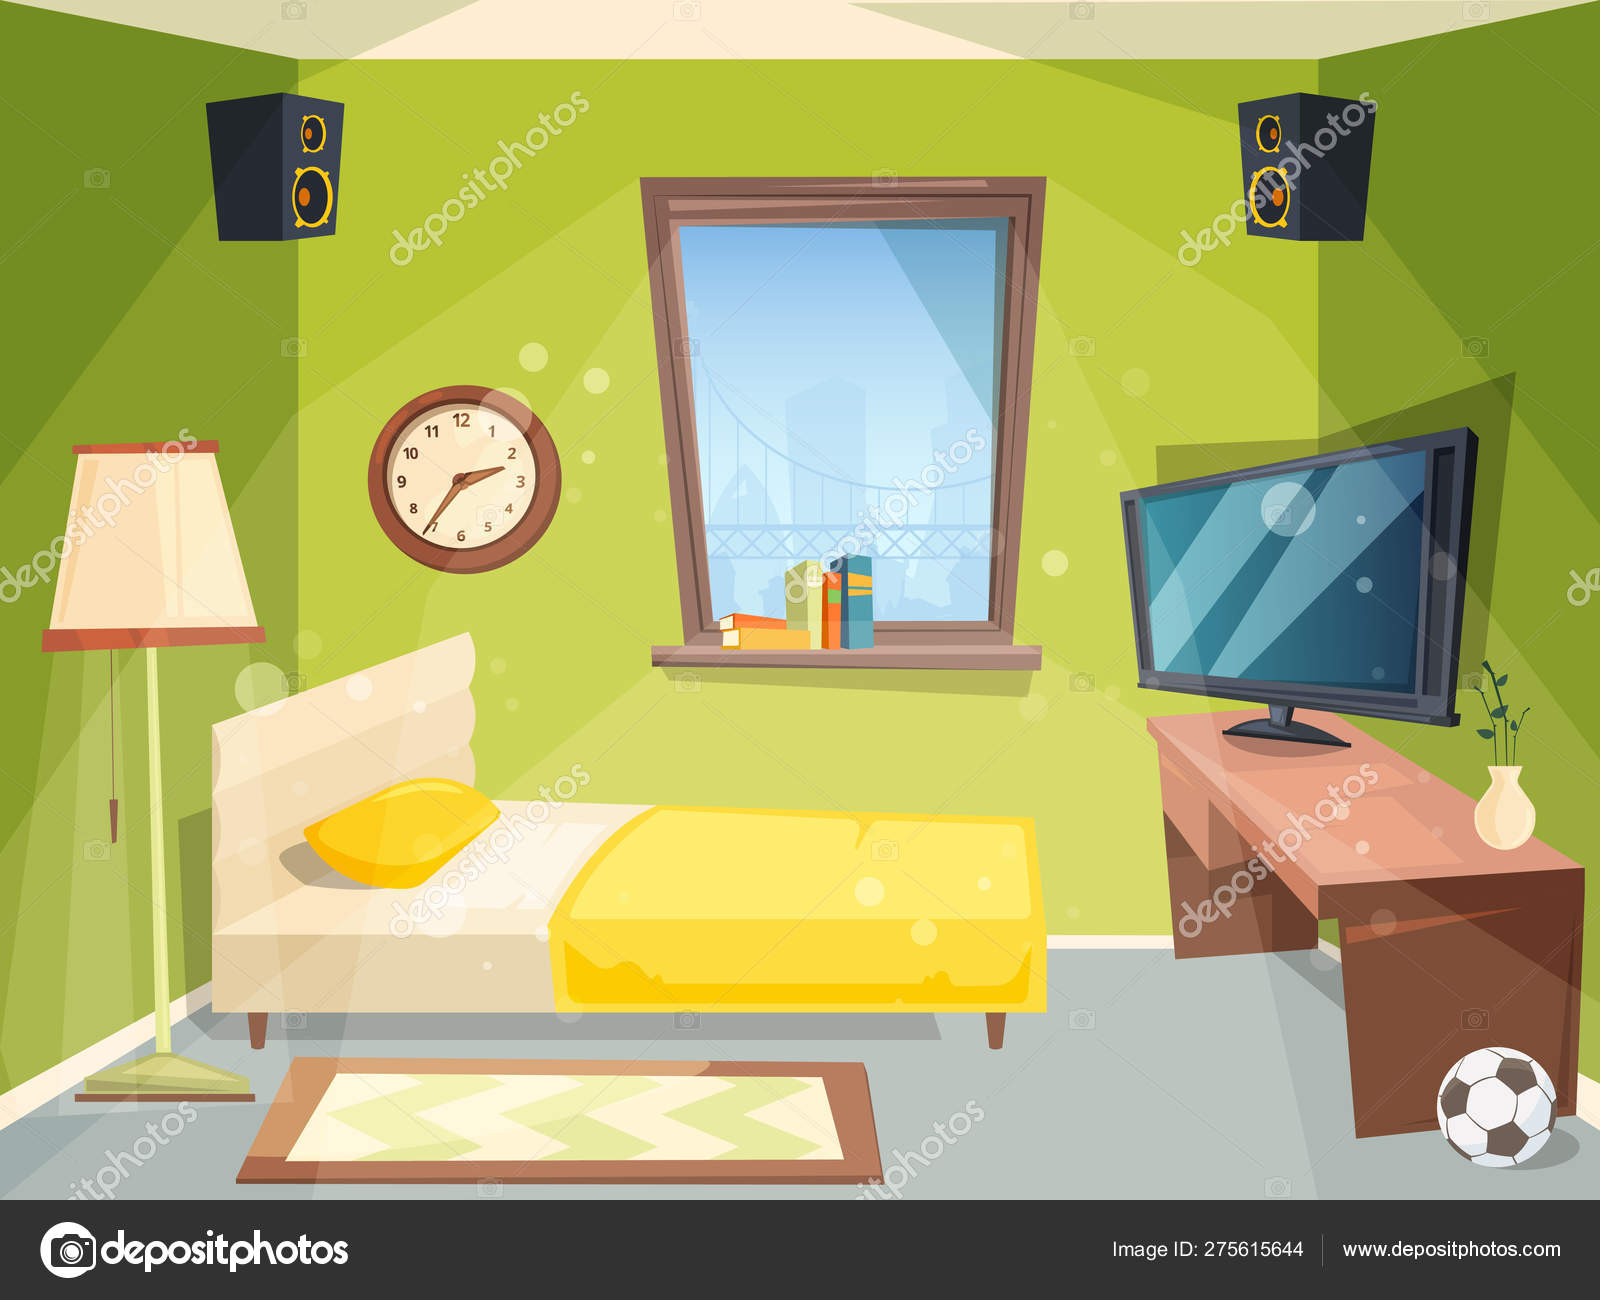 Teen Room Small Bedroom For Kids Student Apartment Inside Of House Modern Interior Vector Cartoon Vector Image By C Onyxprj Vector Stock 275615644